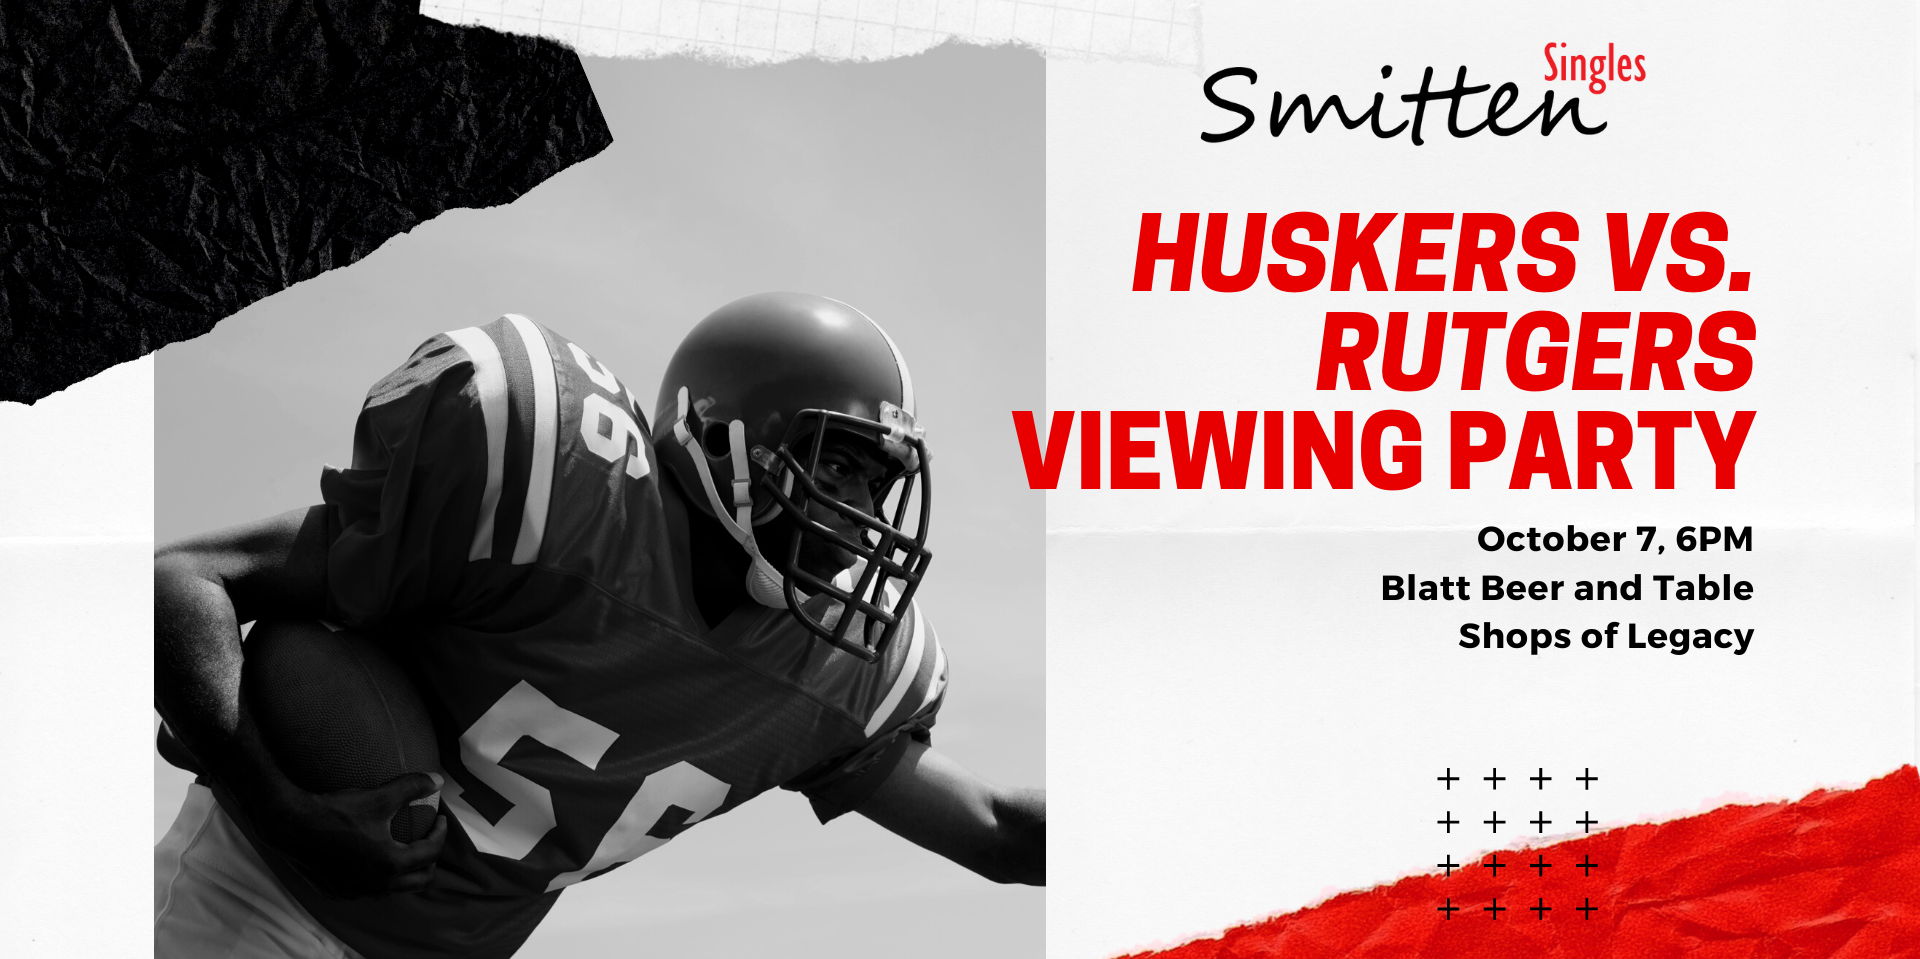 Singles Husker Viewing Party promotional image